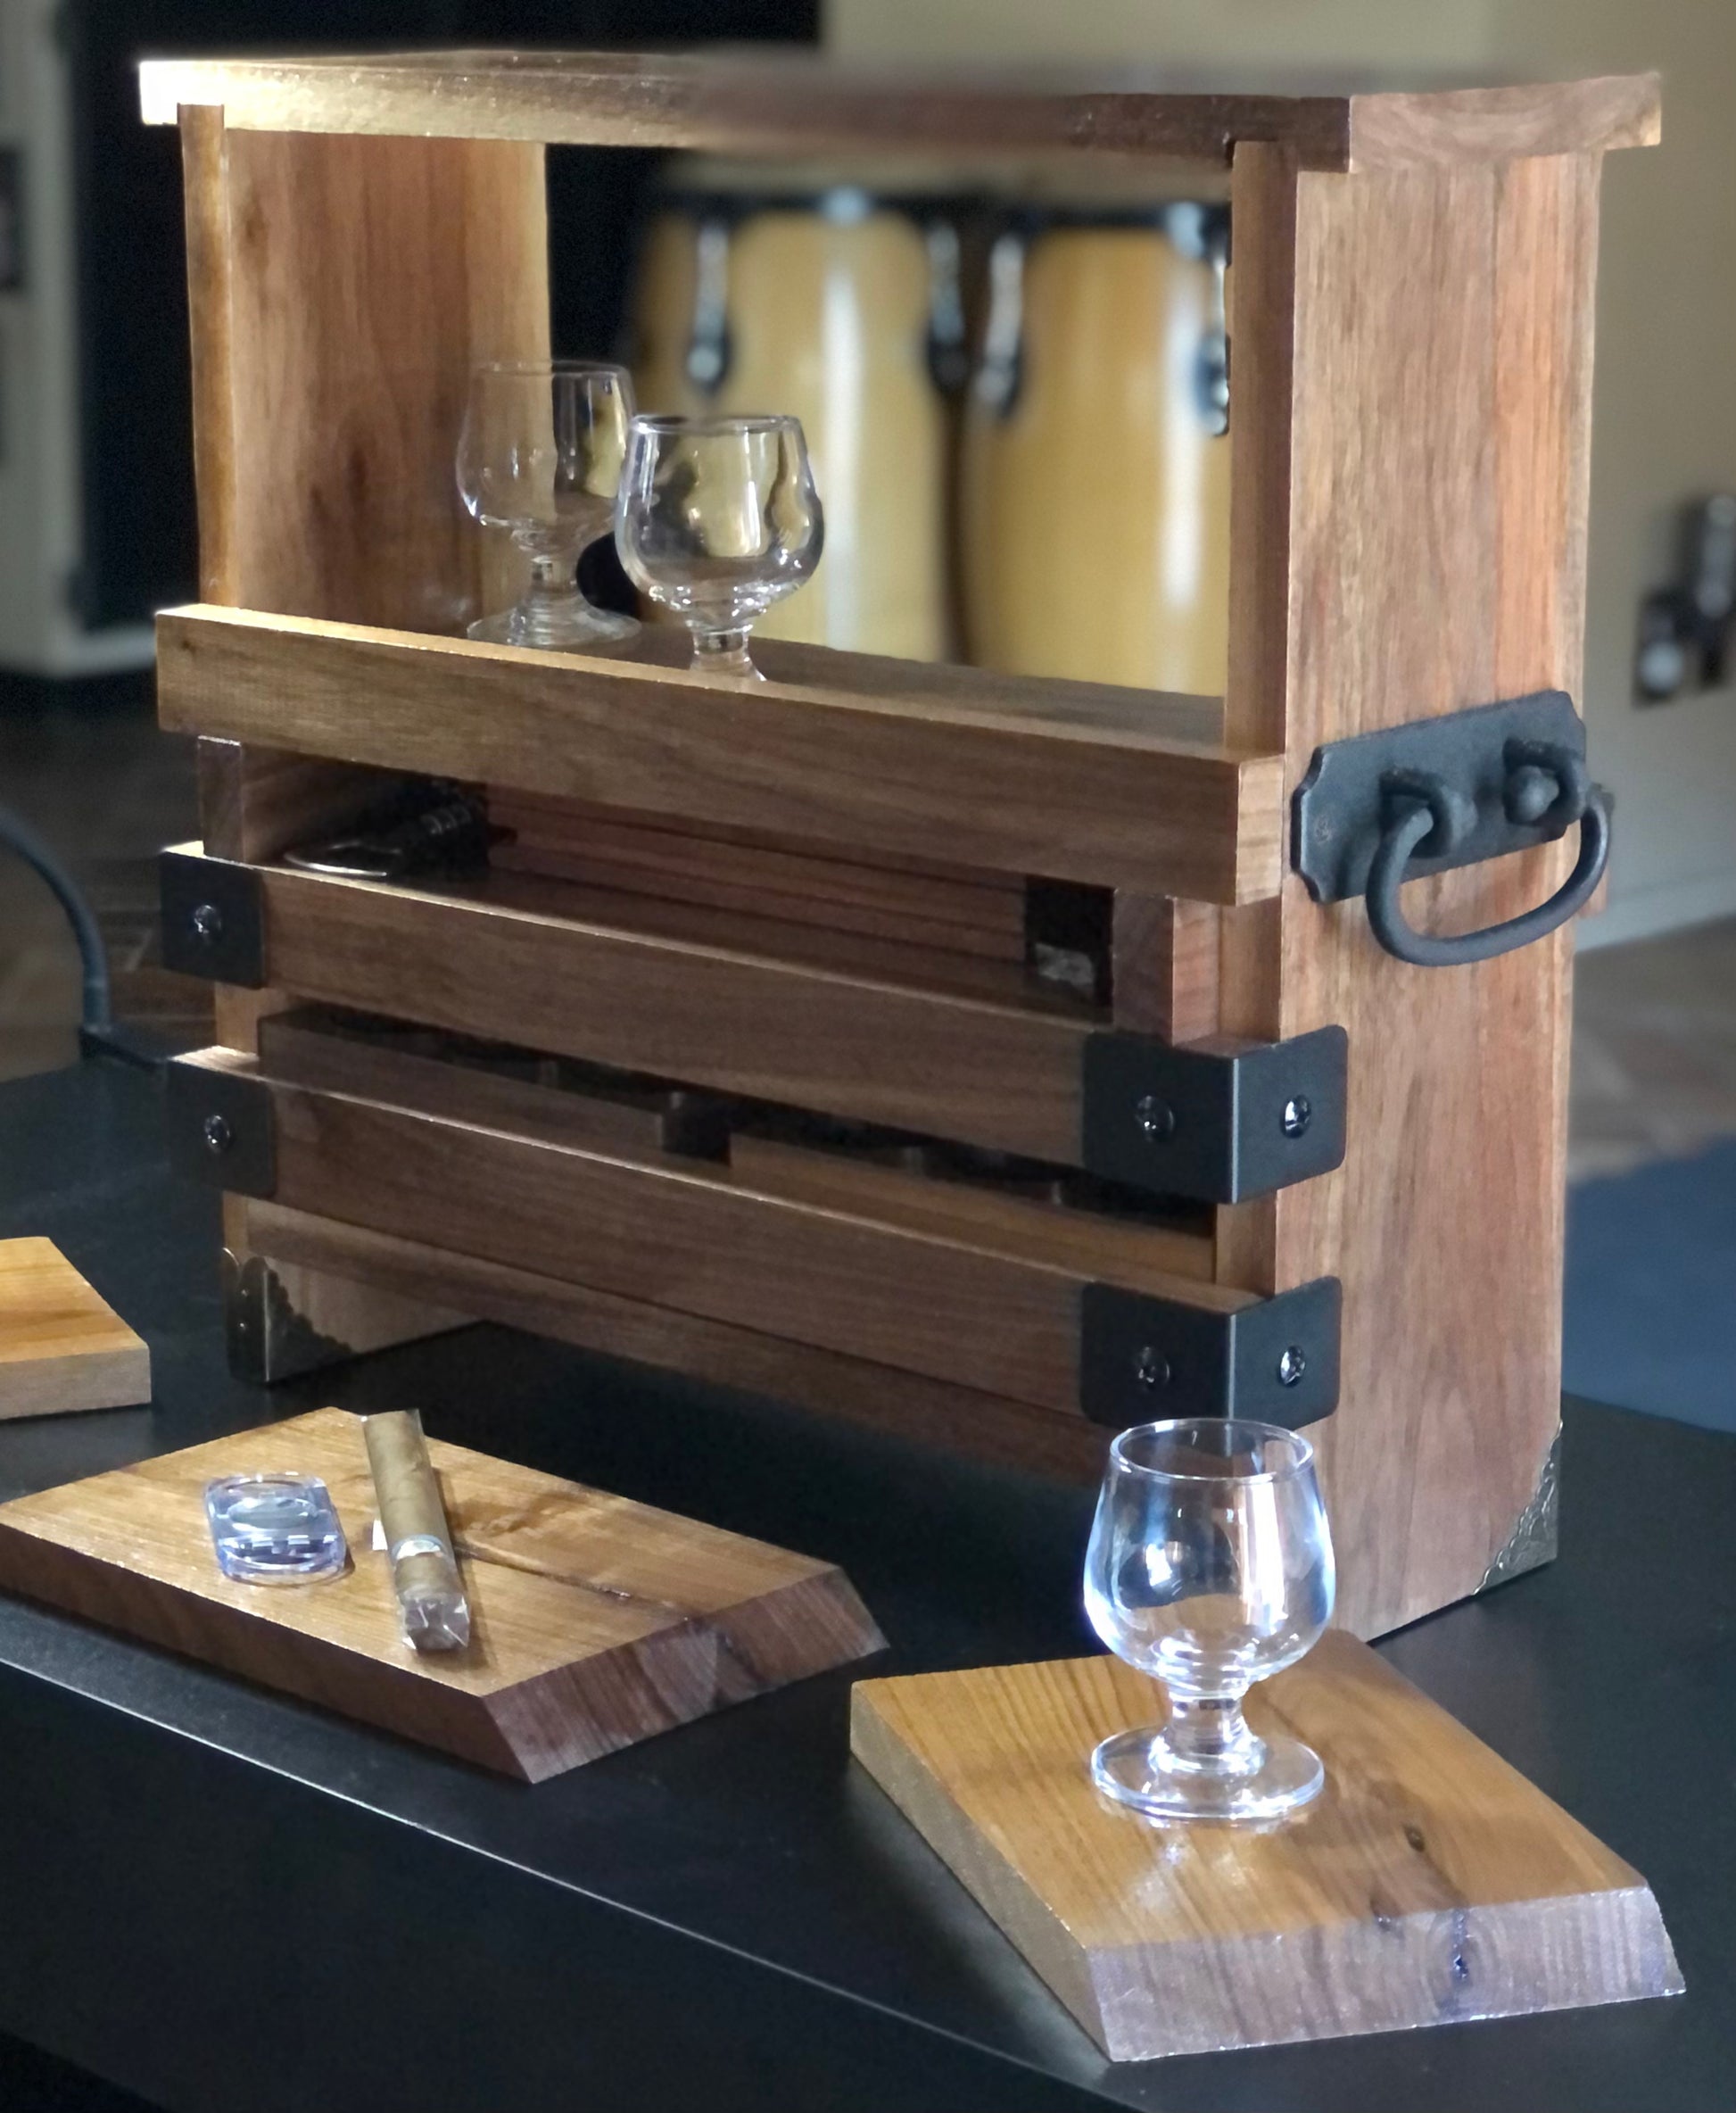 FLIGHT LOUNGE” Portable Wine/Shot glass and cigar party rack